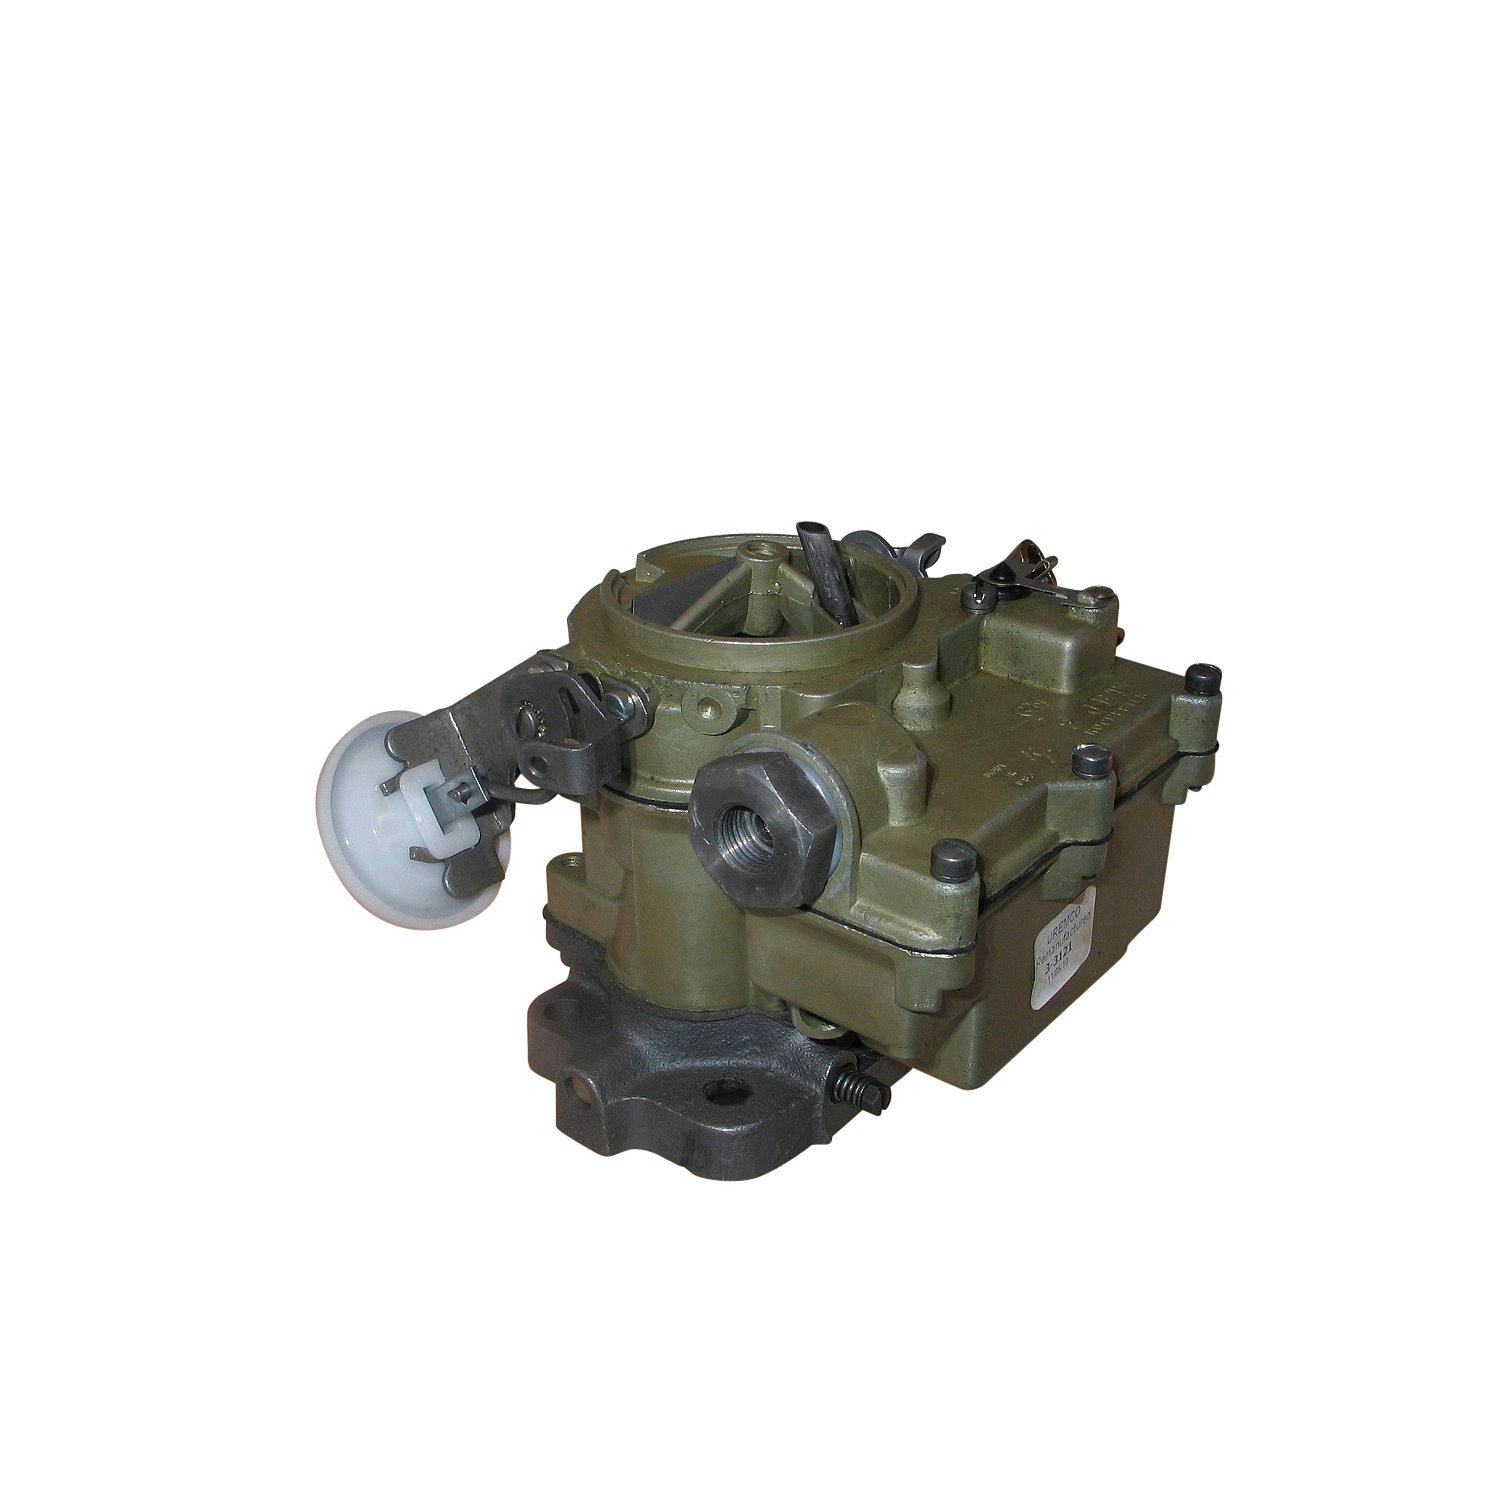 3-3121 Rochester Remanufactured Carburetor, 2GV-Style